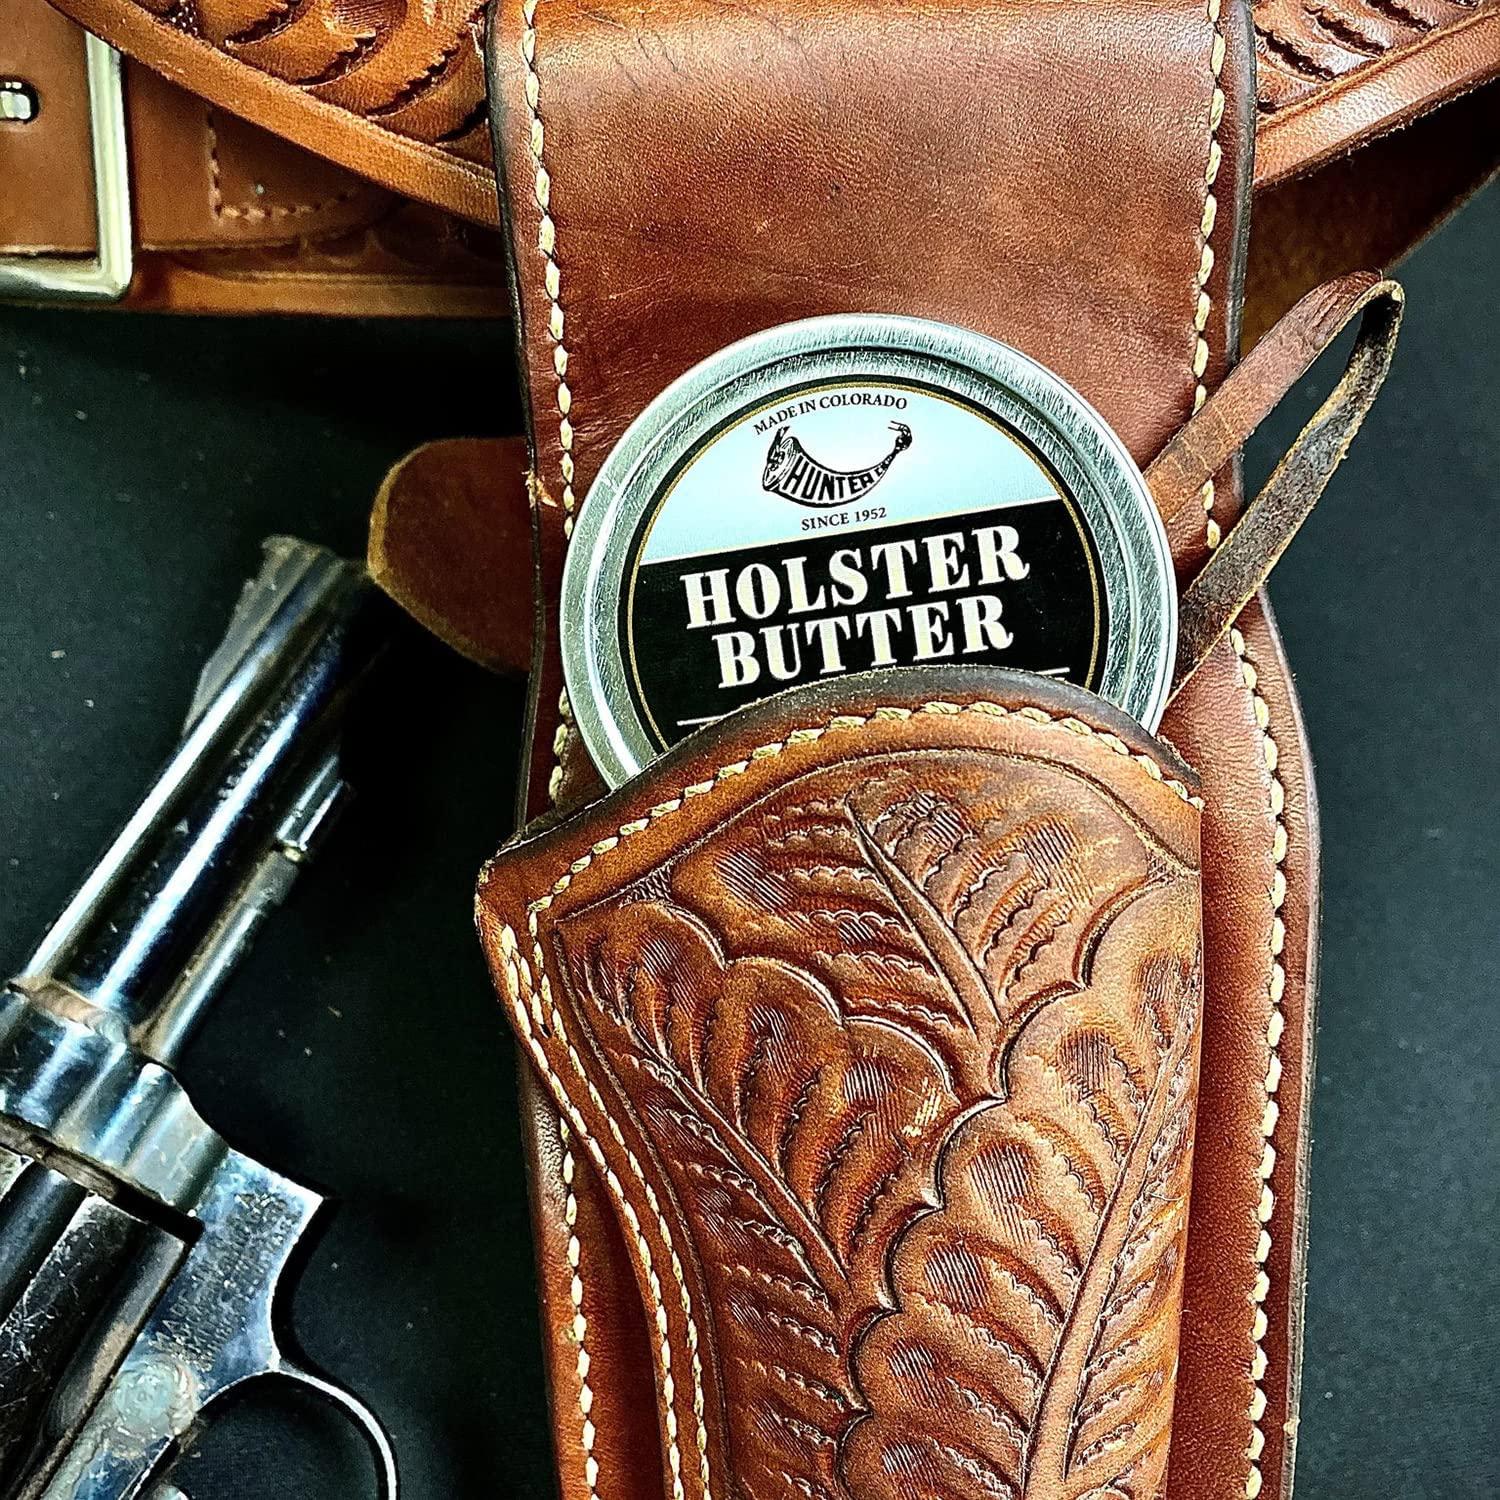 Hunter Company Leather Conditioner, Holster Butter, Leather Scented, Saddle  Soap, Cream Cleaner for Boots, Shoes, Holsters